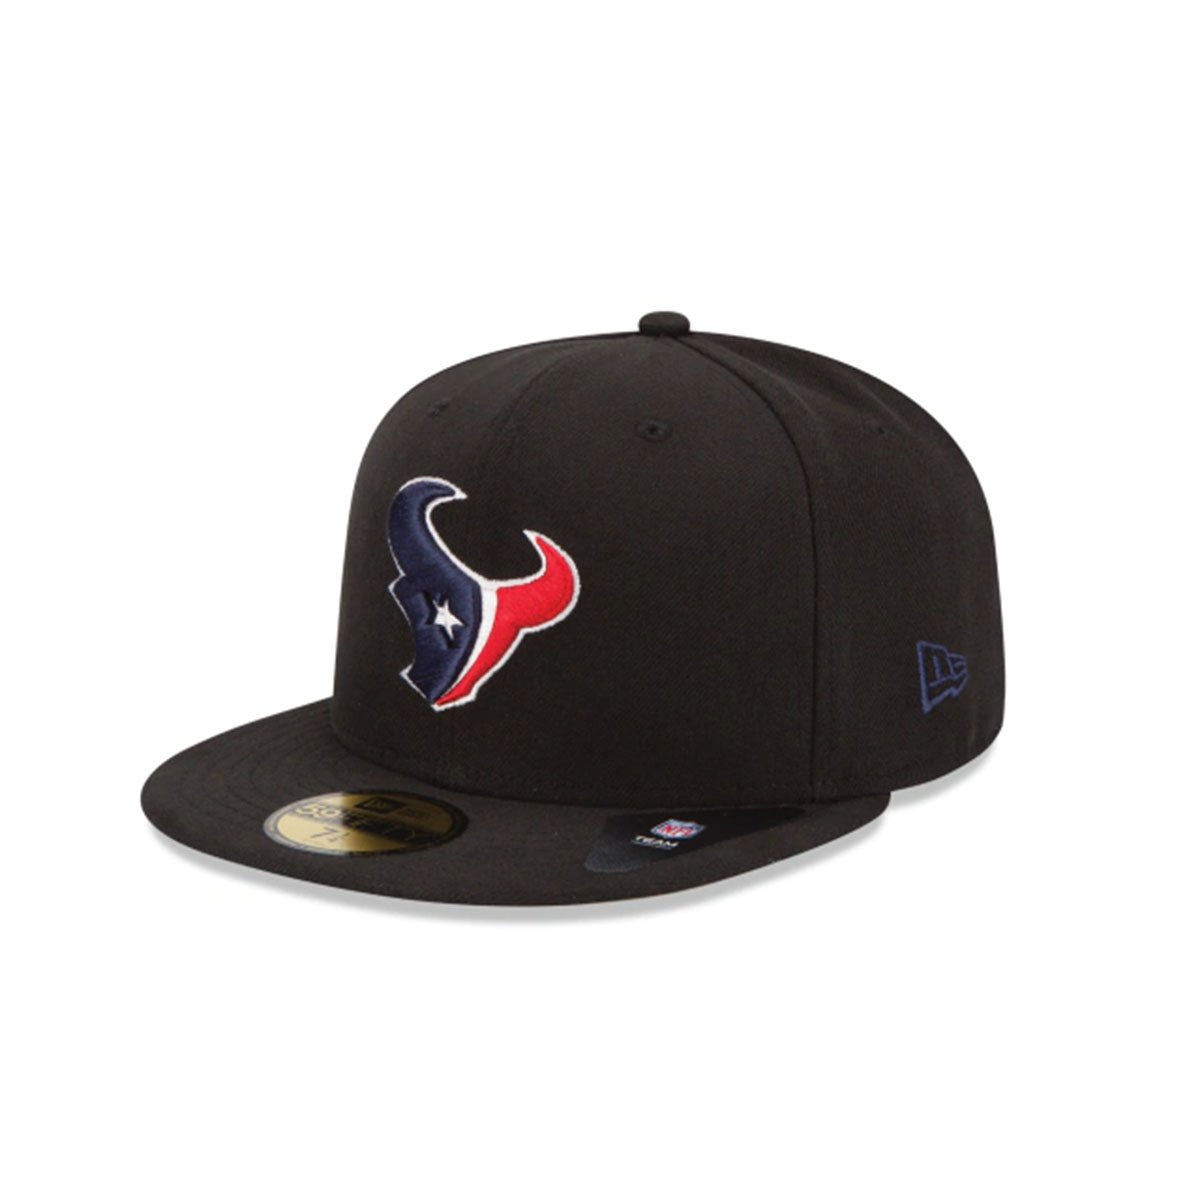 HOUSTON TEXANS 59FIFTY FITTED BLACK/NAVY